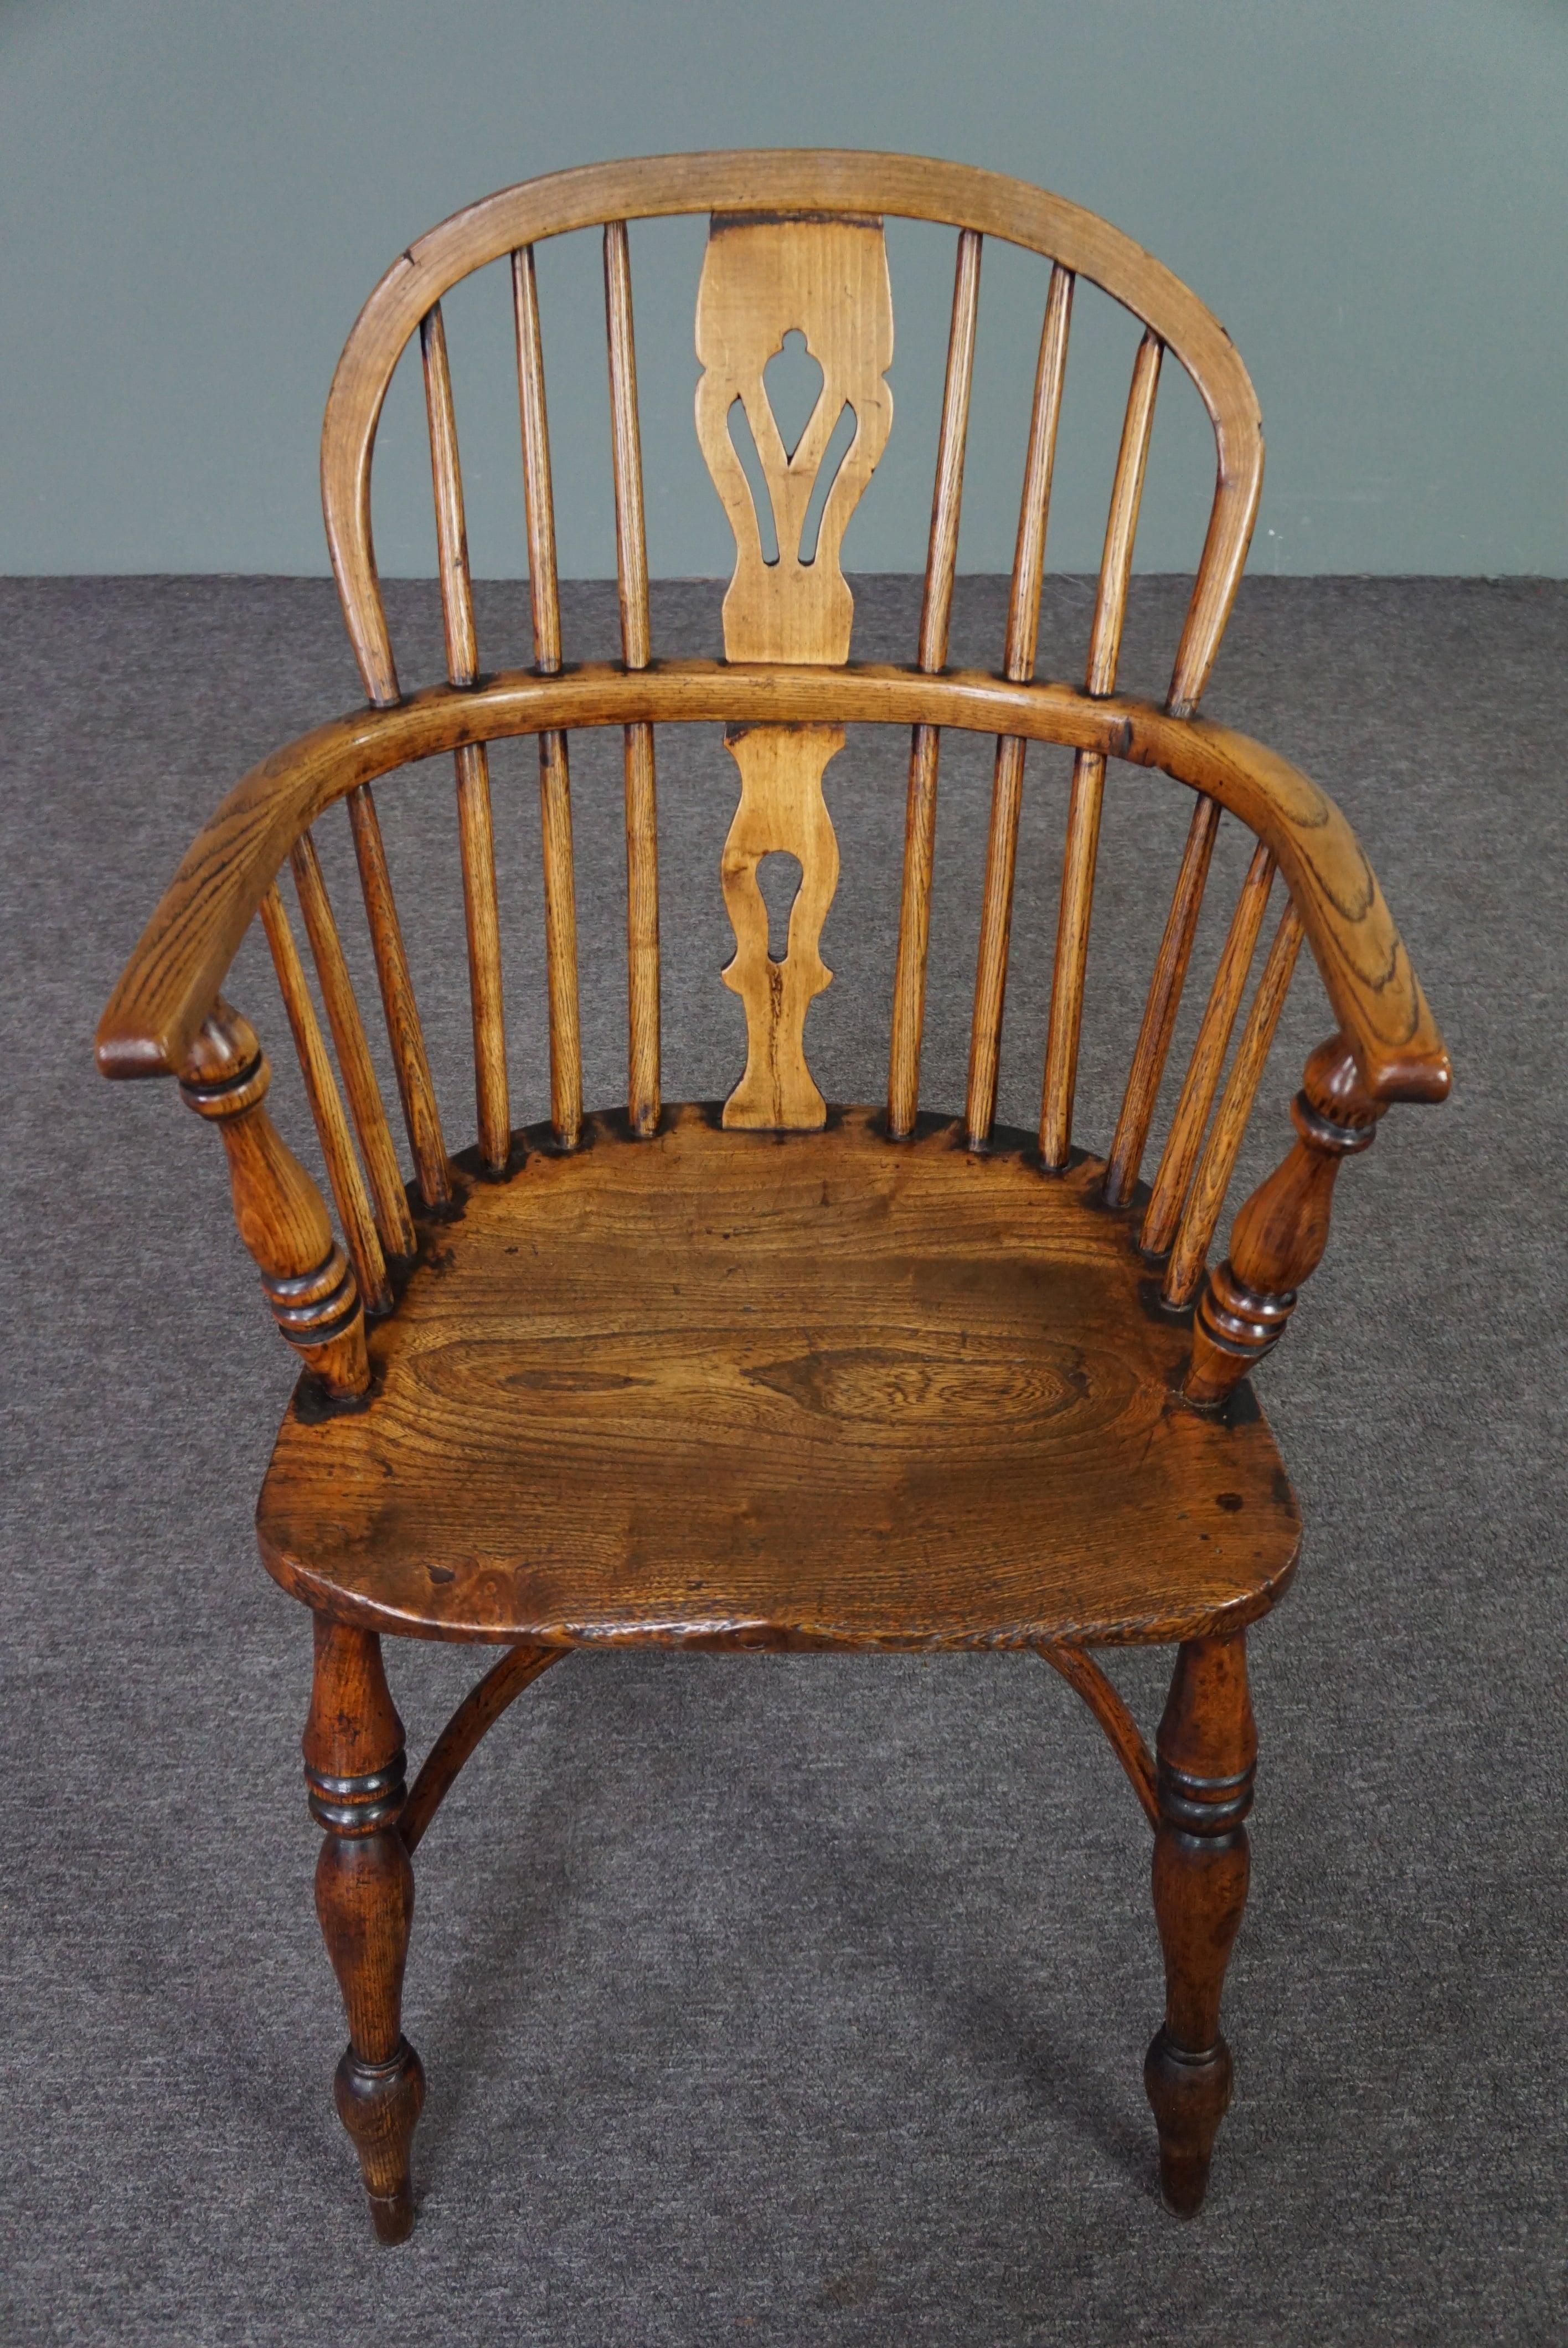 Antique Windsor chair/armchair, English Low Back, 18th century For Sale 1